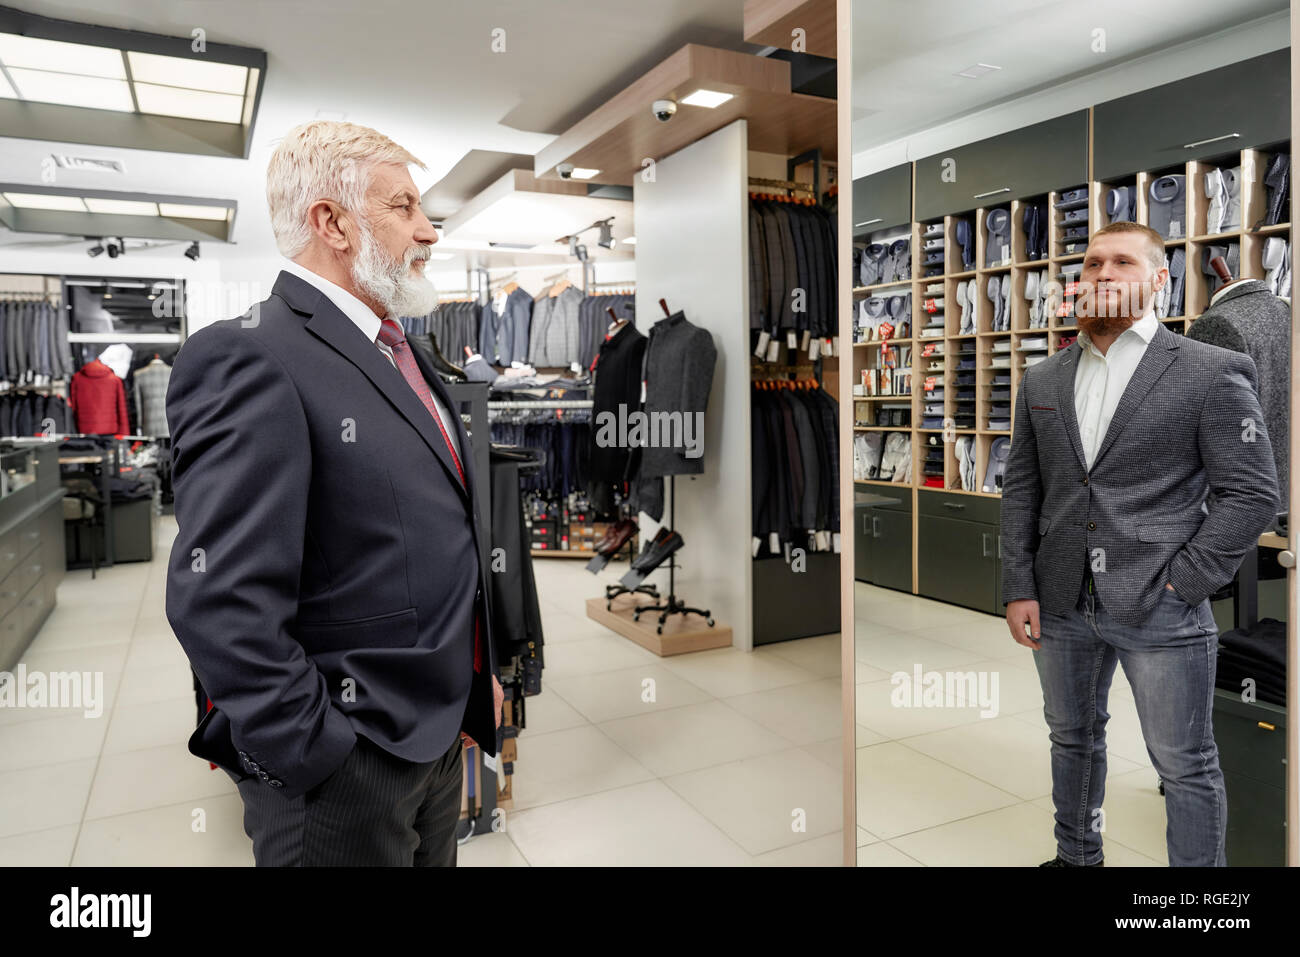 Elderly, bearded man with grey hair trying on classic suit with tie and shirt in boutique. Man looking at mirror and seeing reflection of young trendy and charming man. Expensive menswear garment. Stock Photo